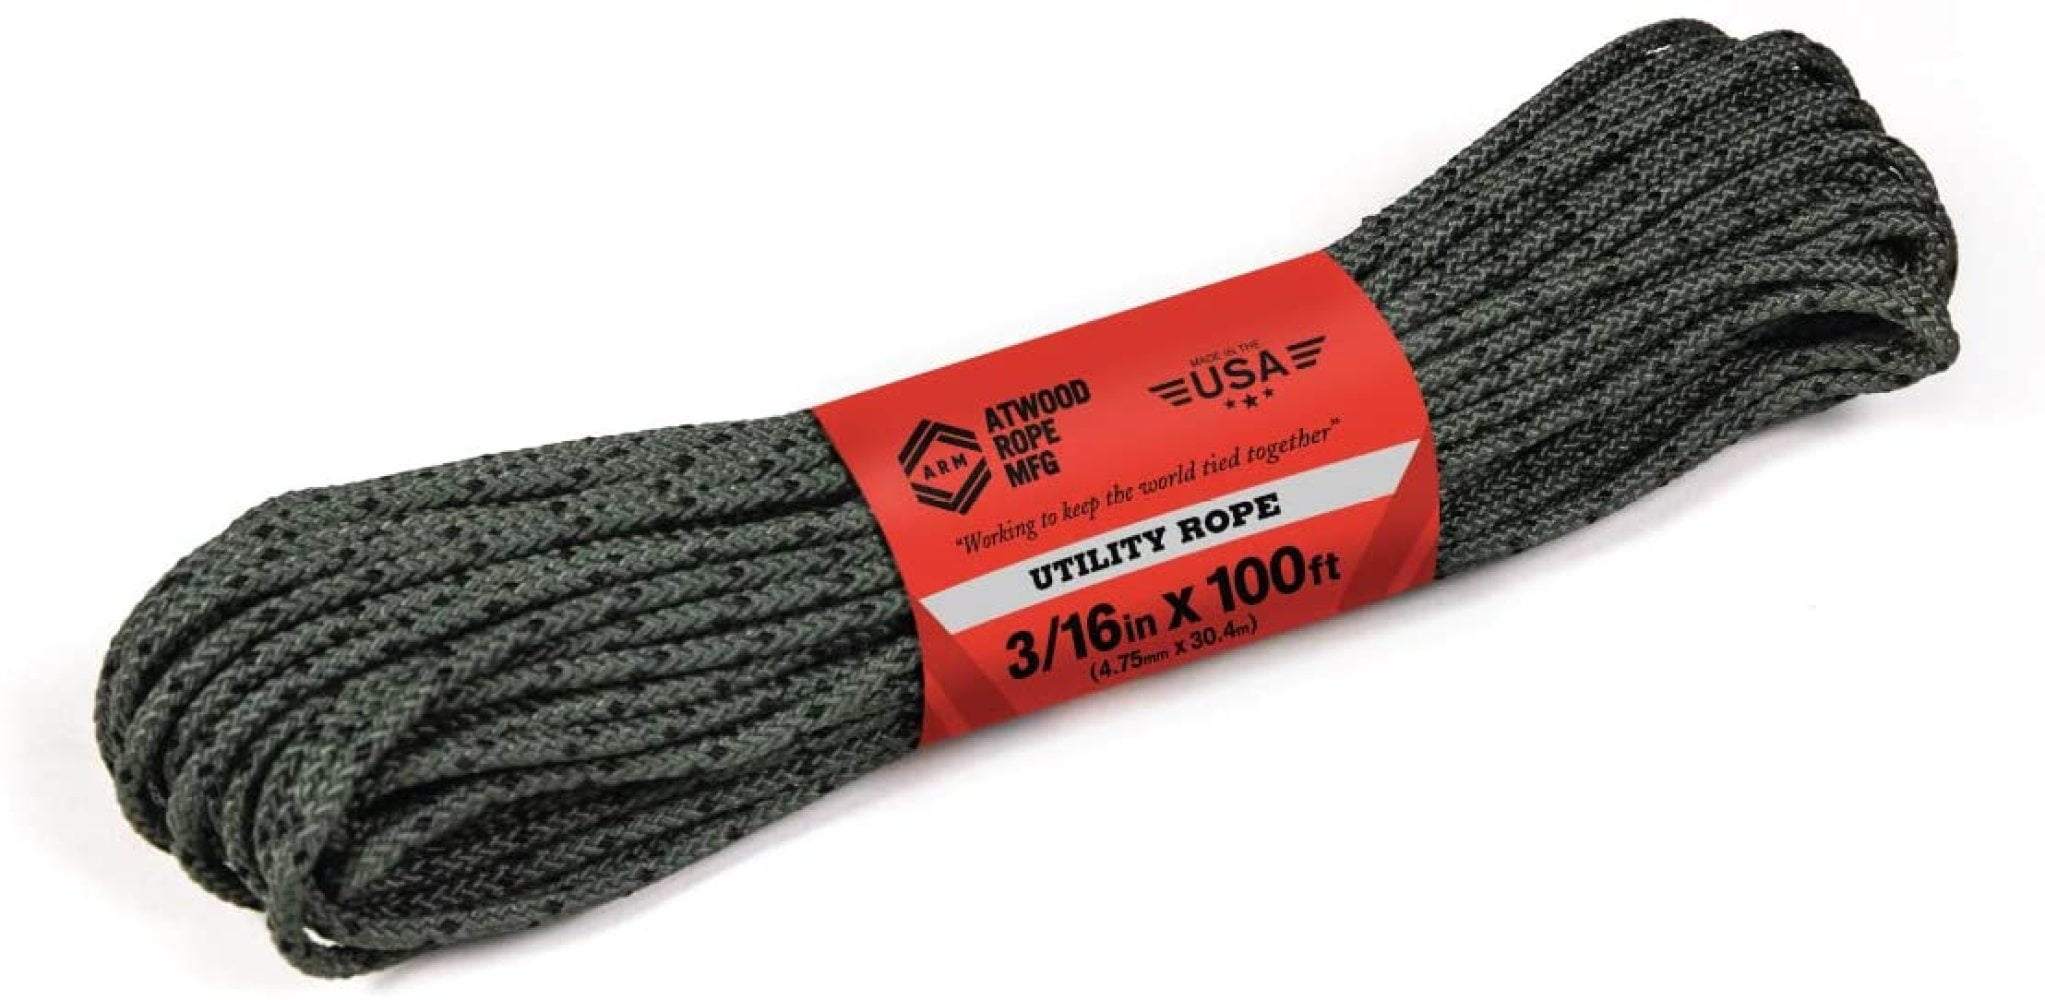 Made in USA new item 100 Ft 3/16" Braided Utility Rope  300 lb 